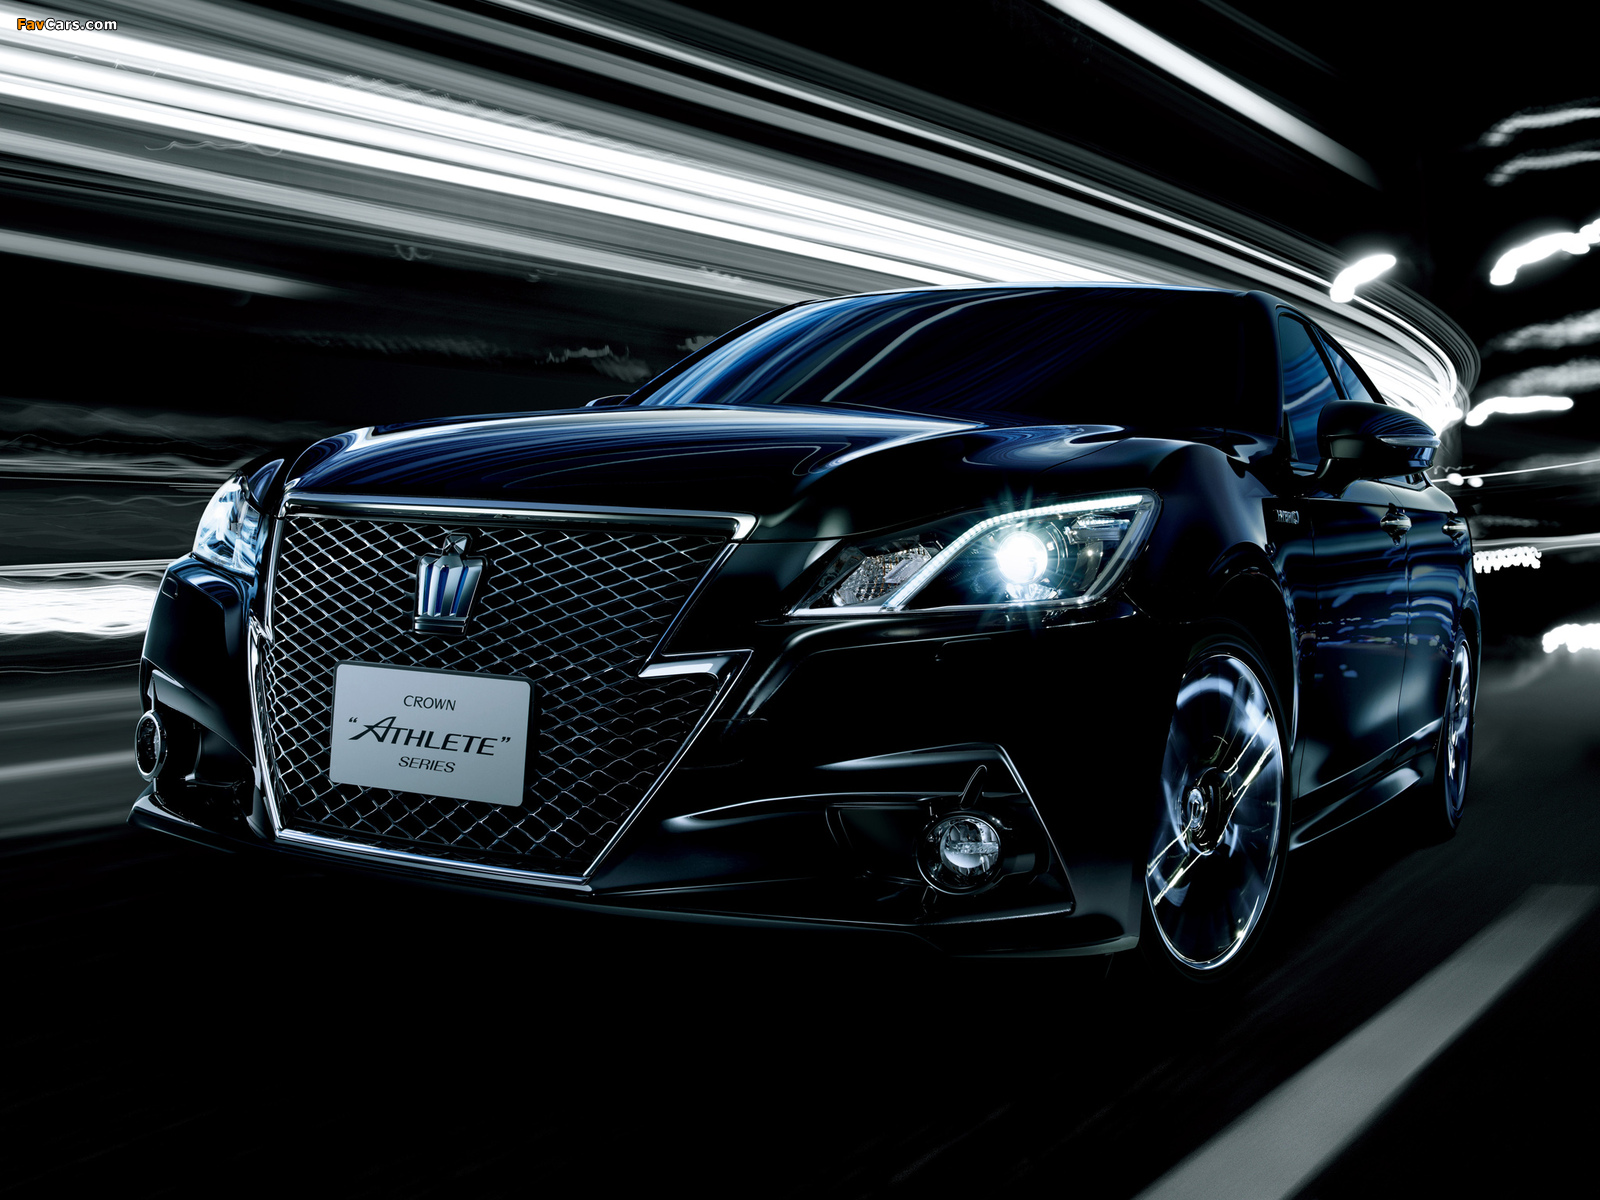 Toyota Crown Hybrid Athlete (S210) 2012 wallpapers (1600 x 1200)